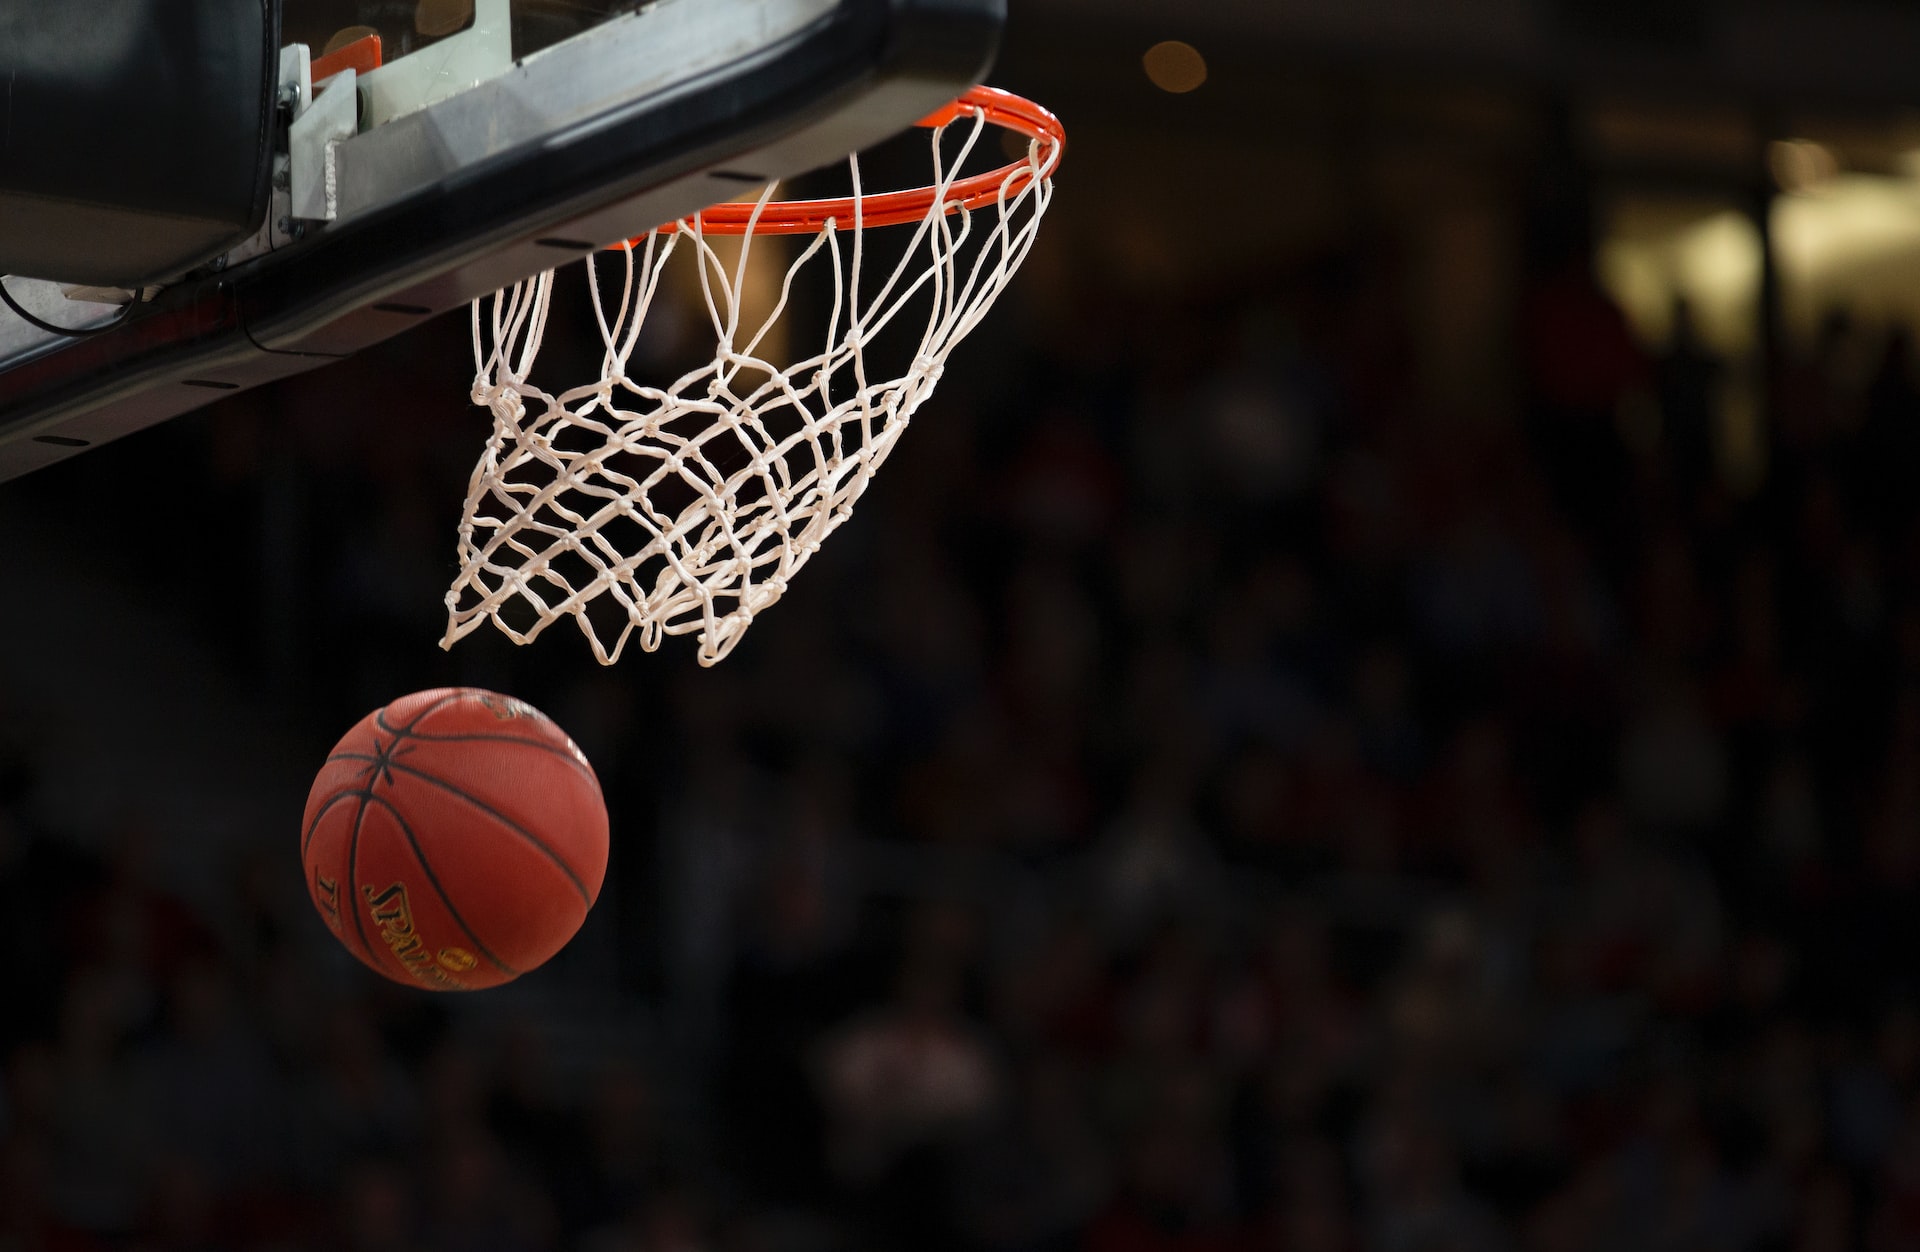 Women’s Basketball Betting in Canada | Where to Bet?